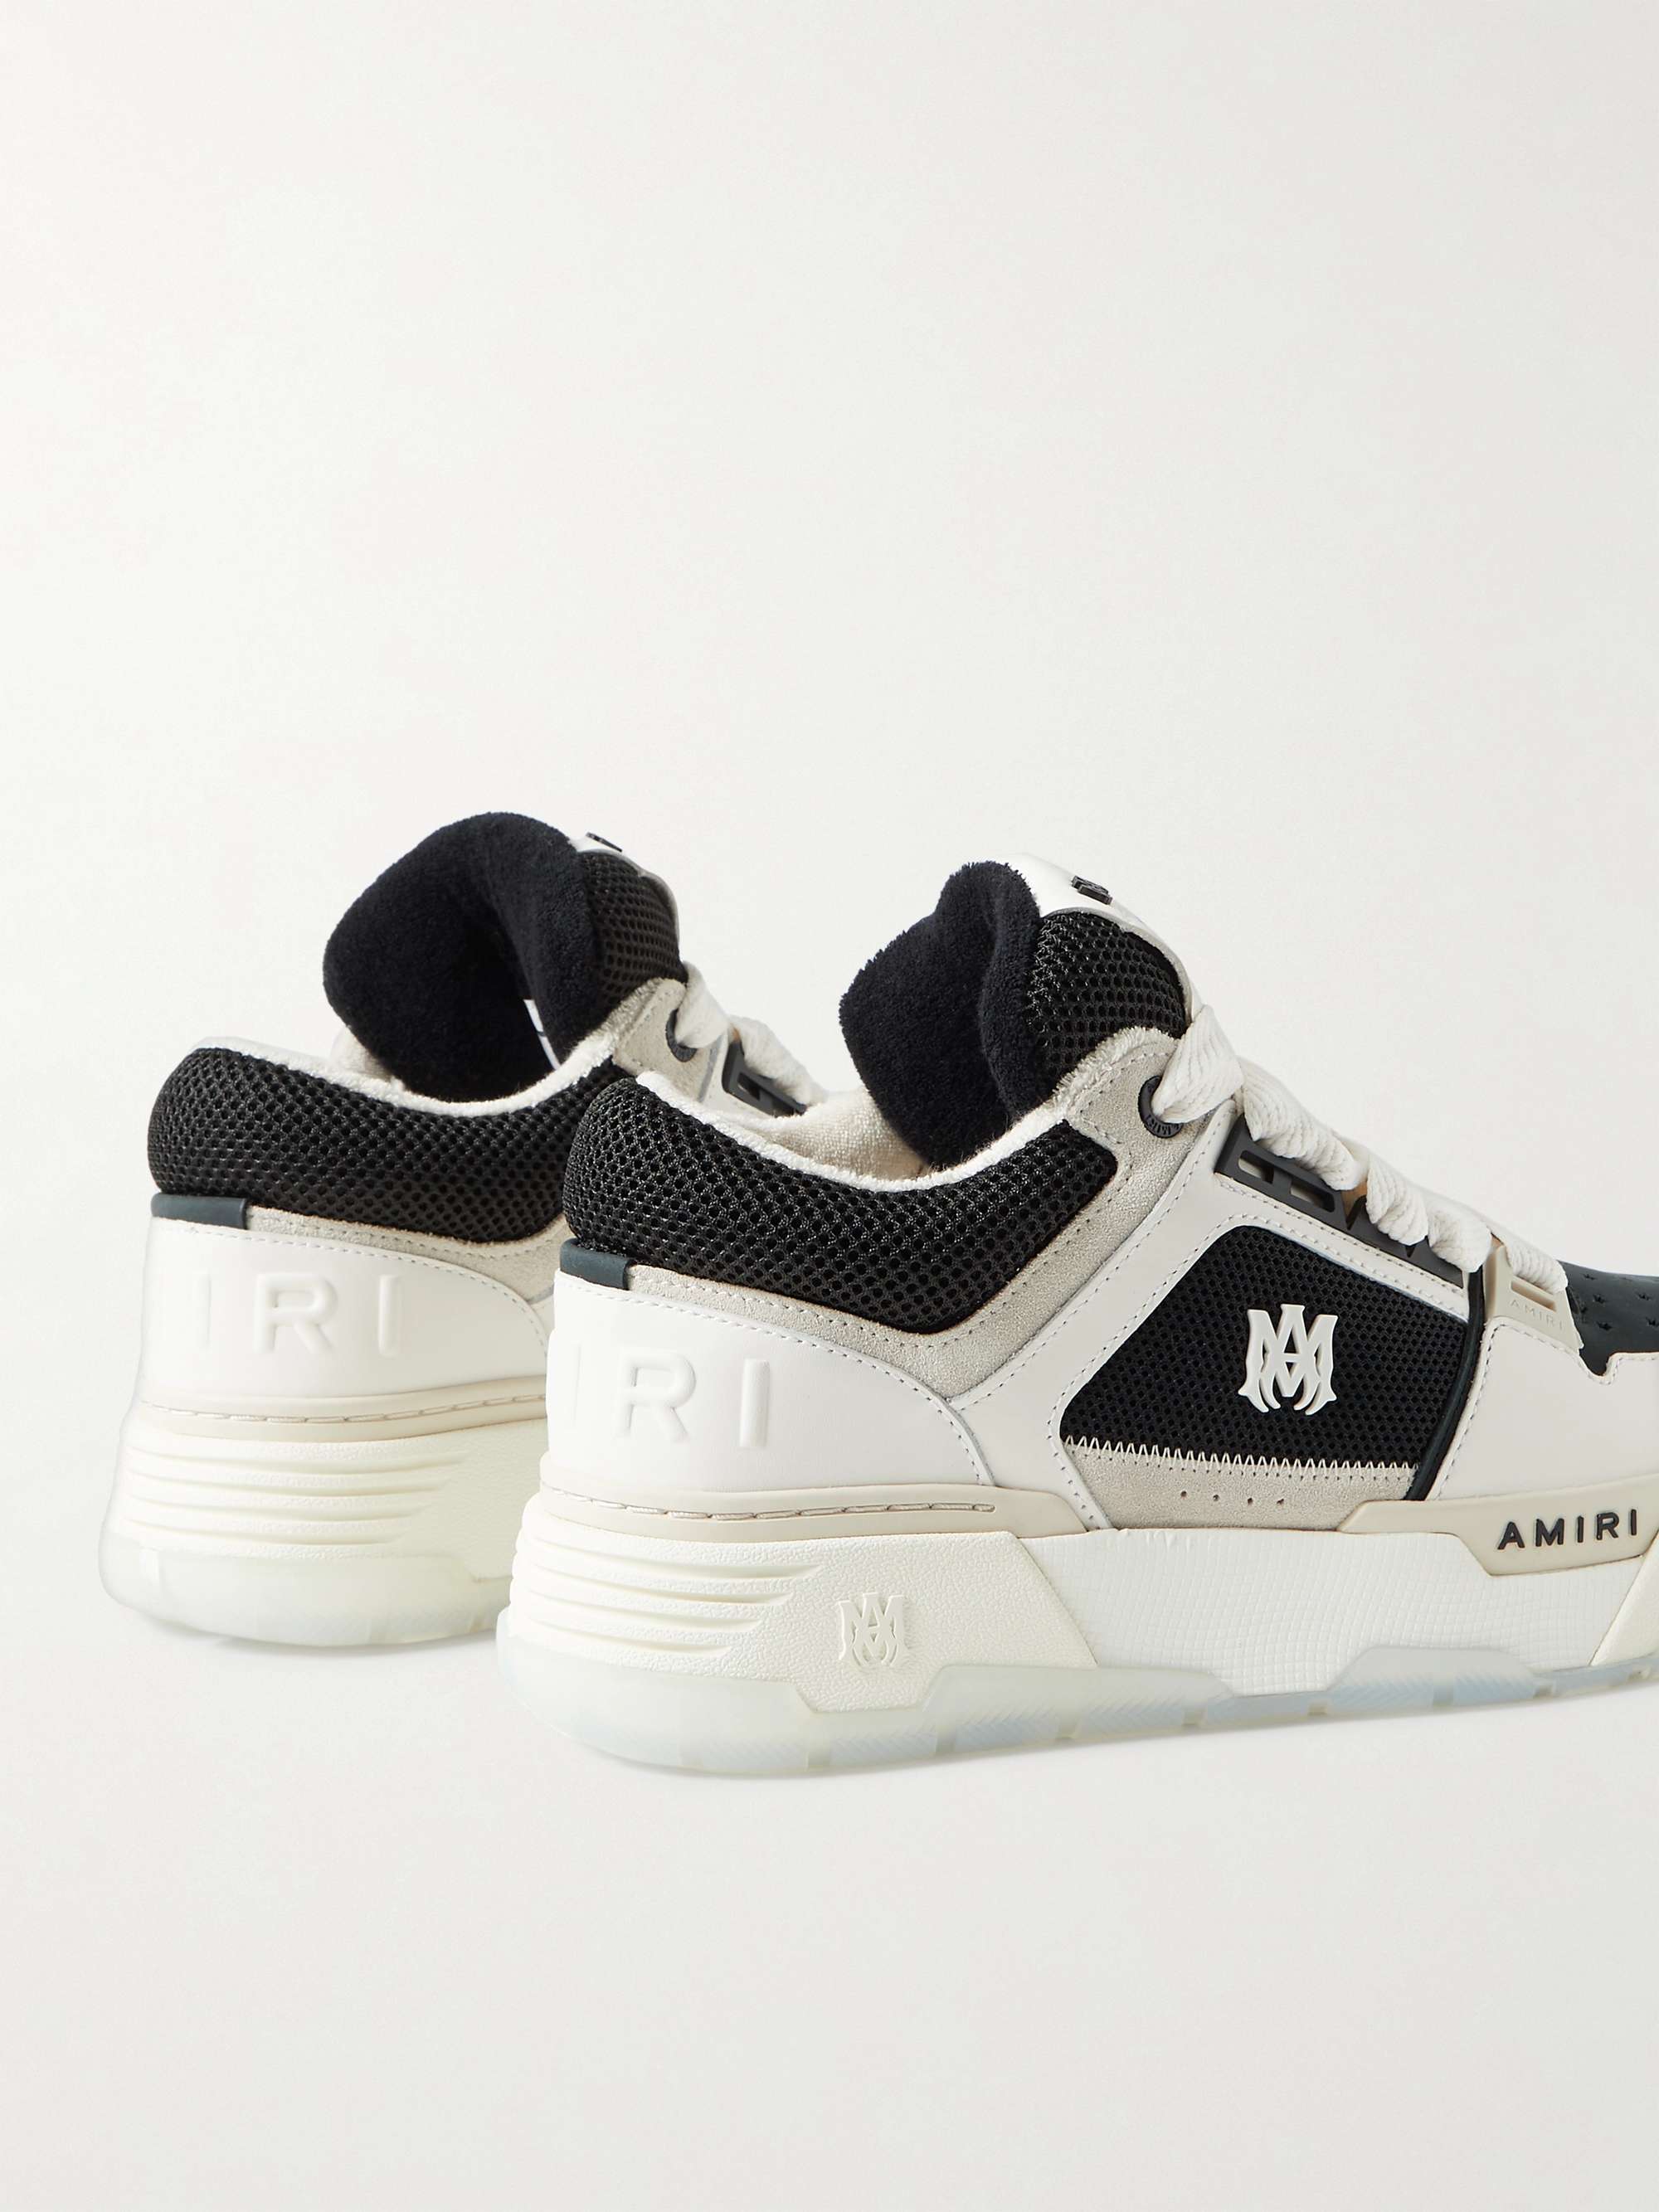 AMIRI MA-1 Leather, Suede and Mesh Sneakers